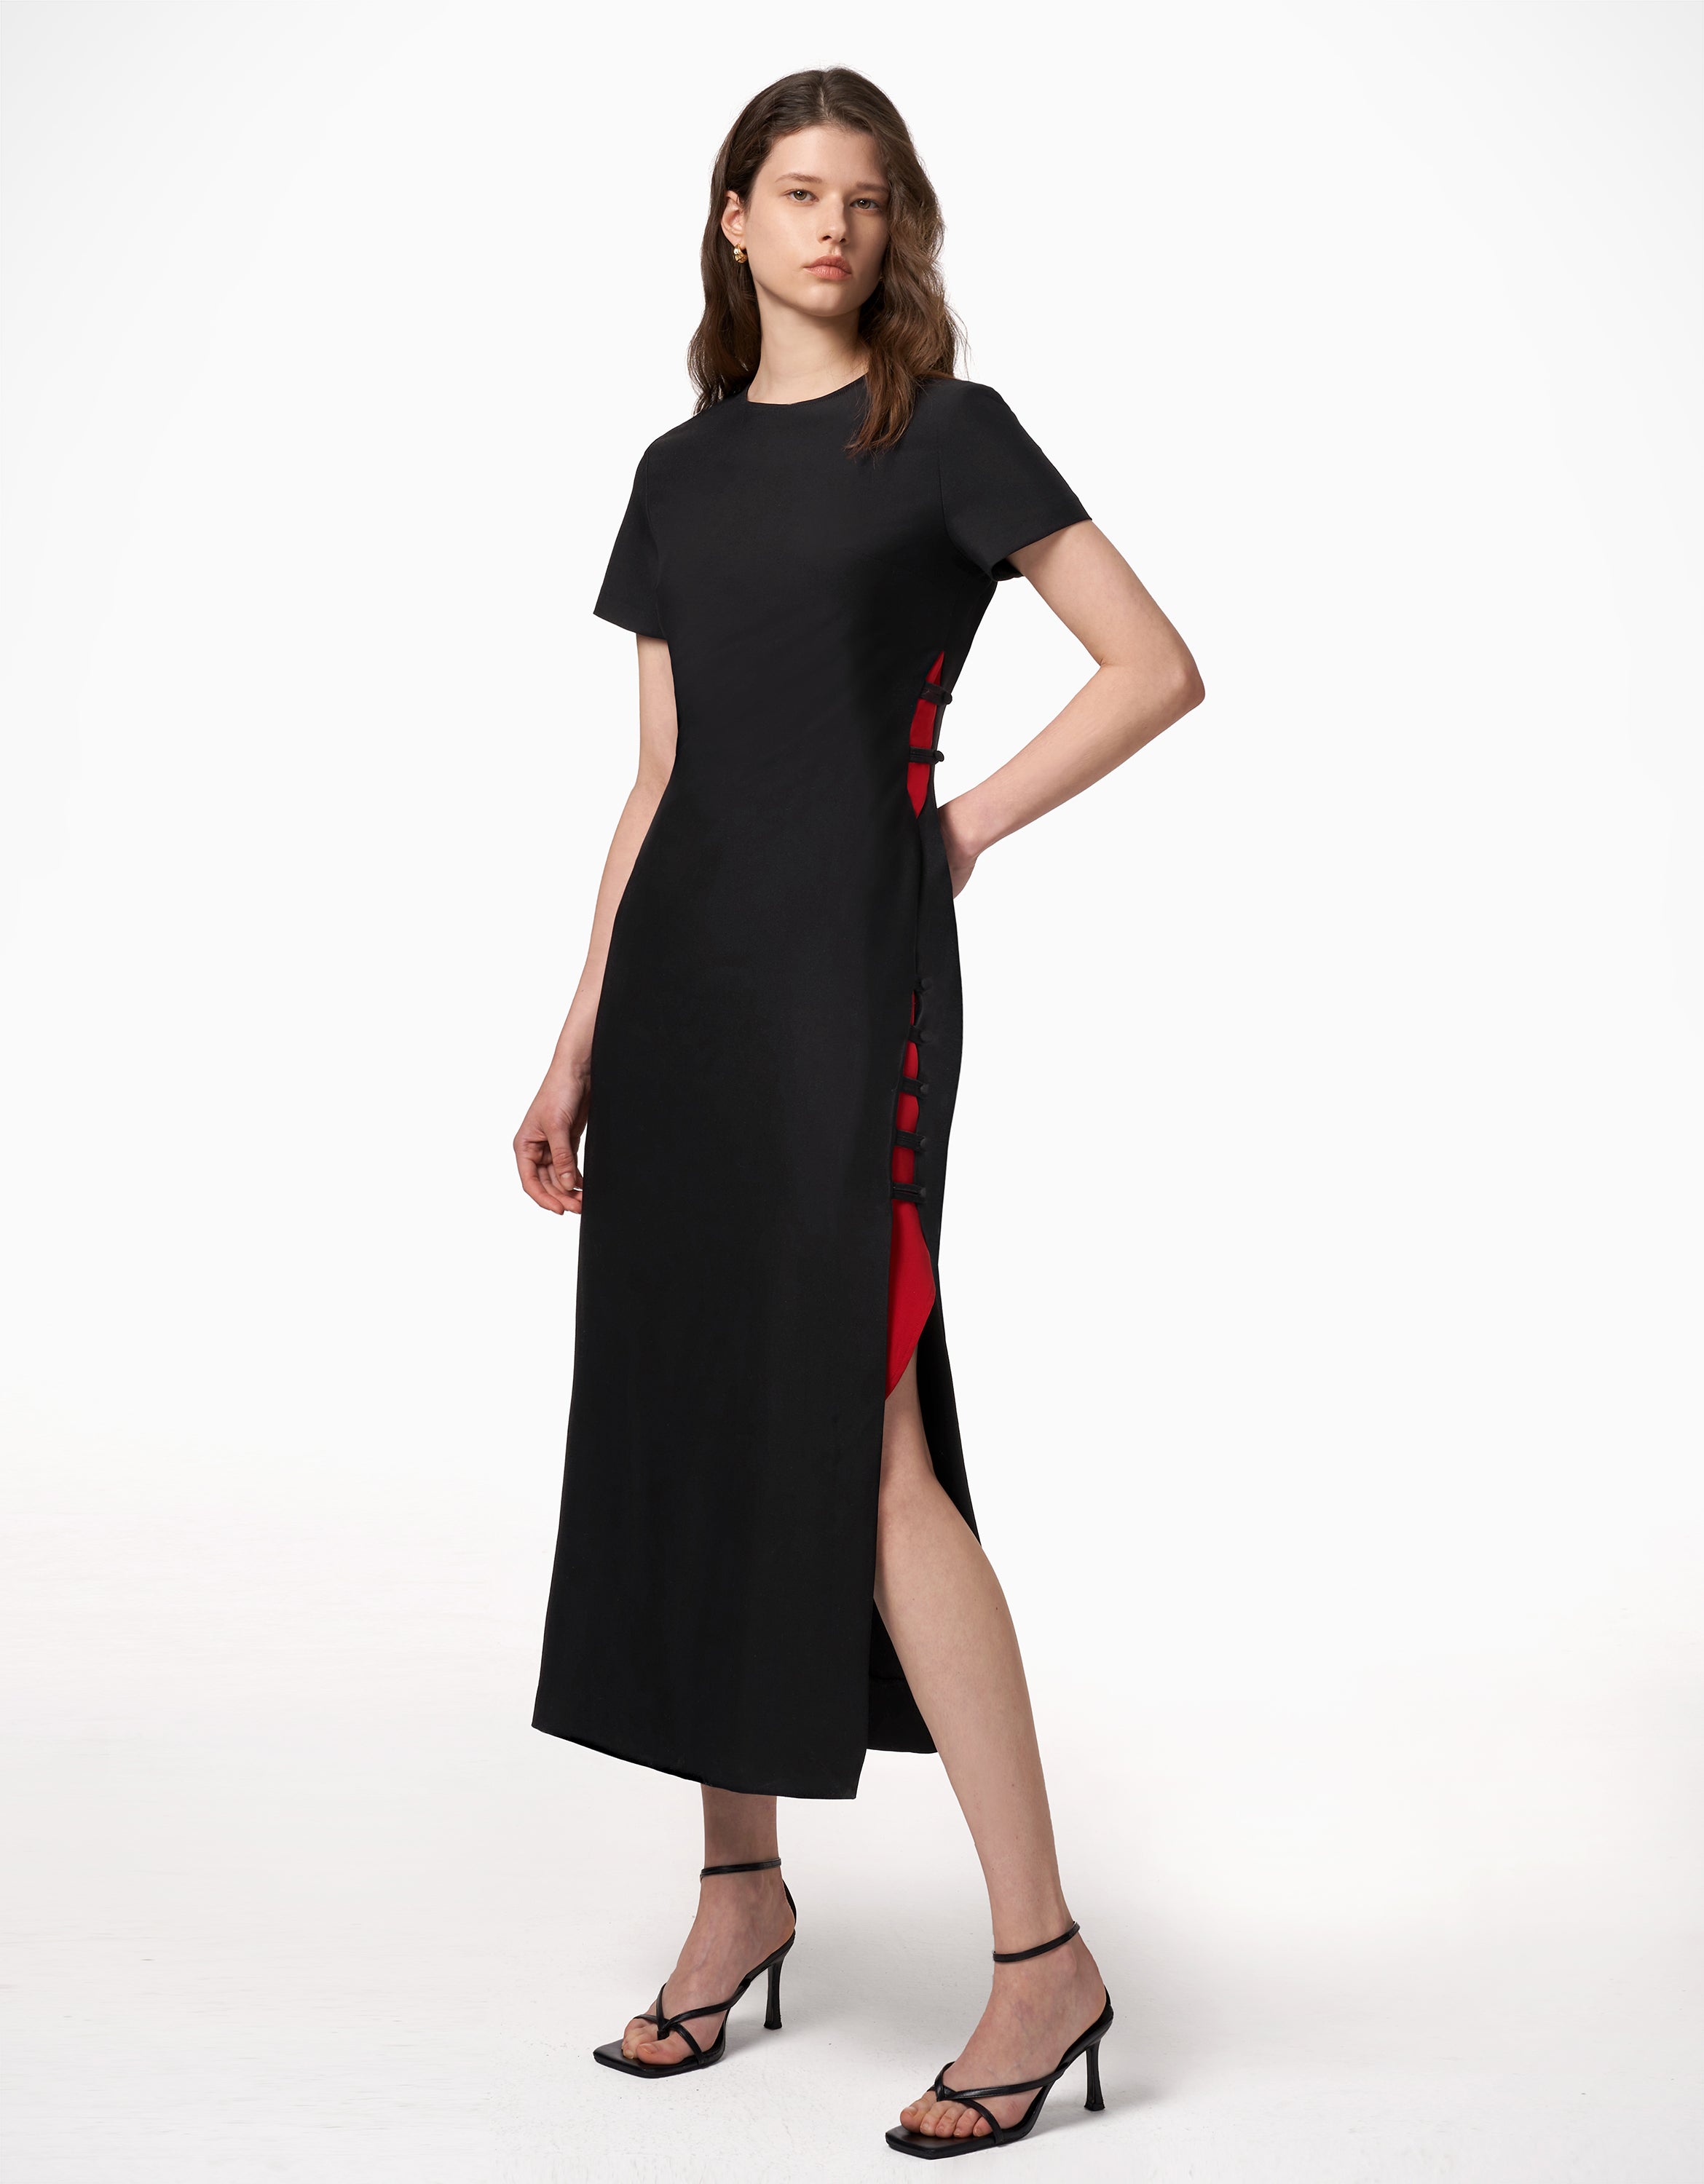 black & red(a22638)